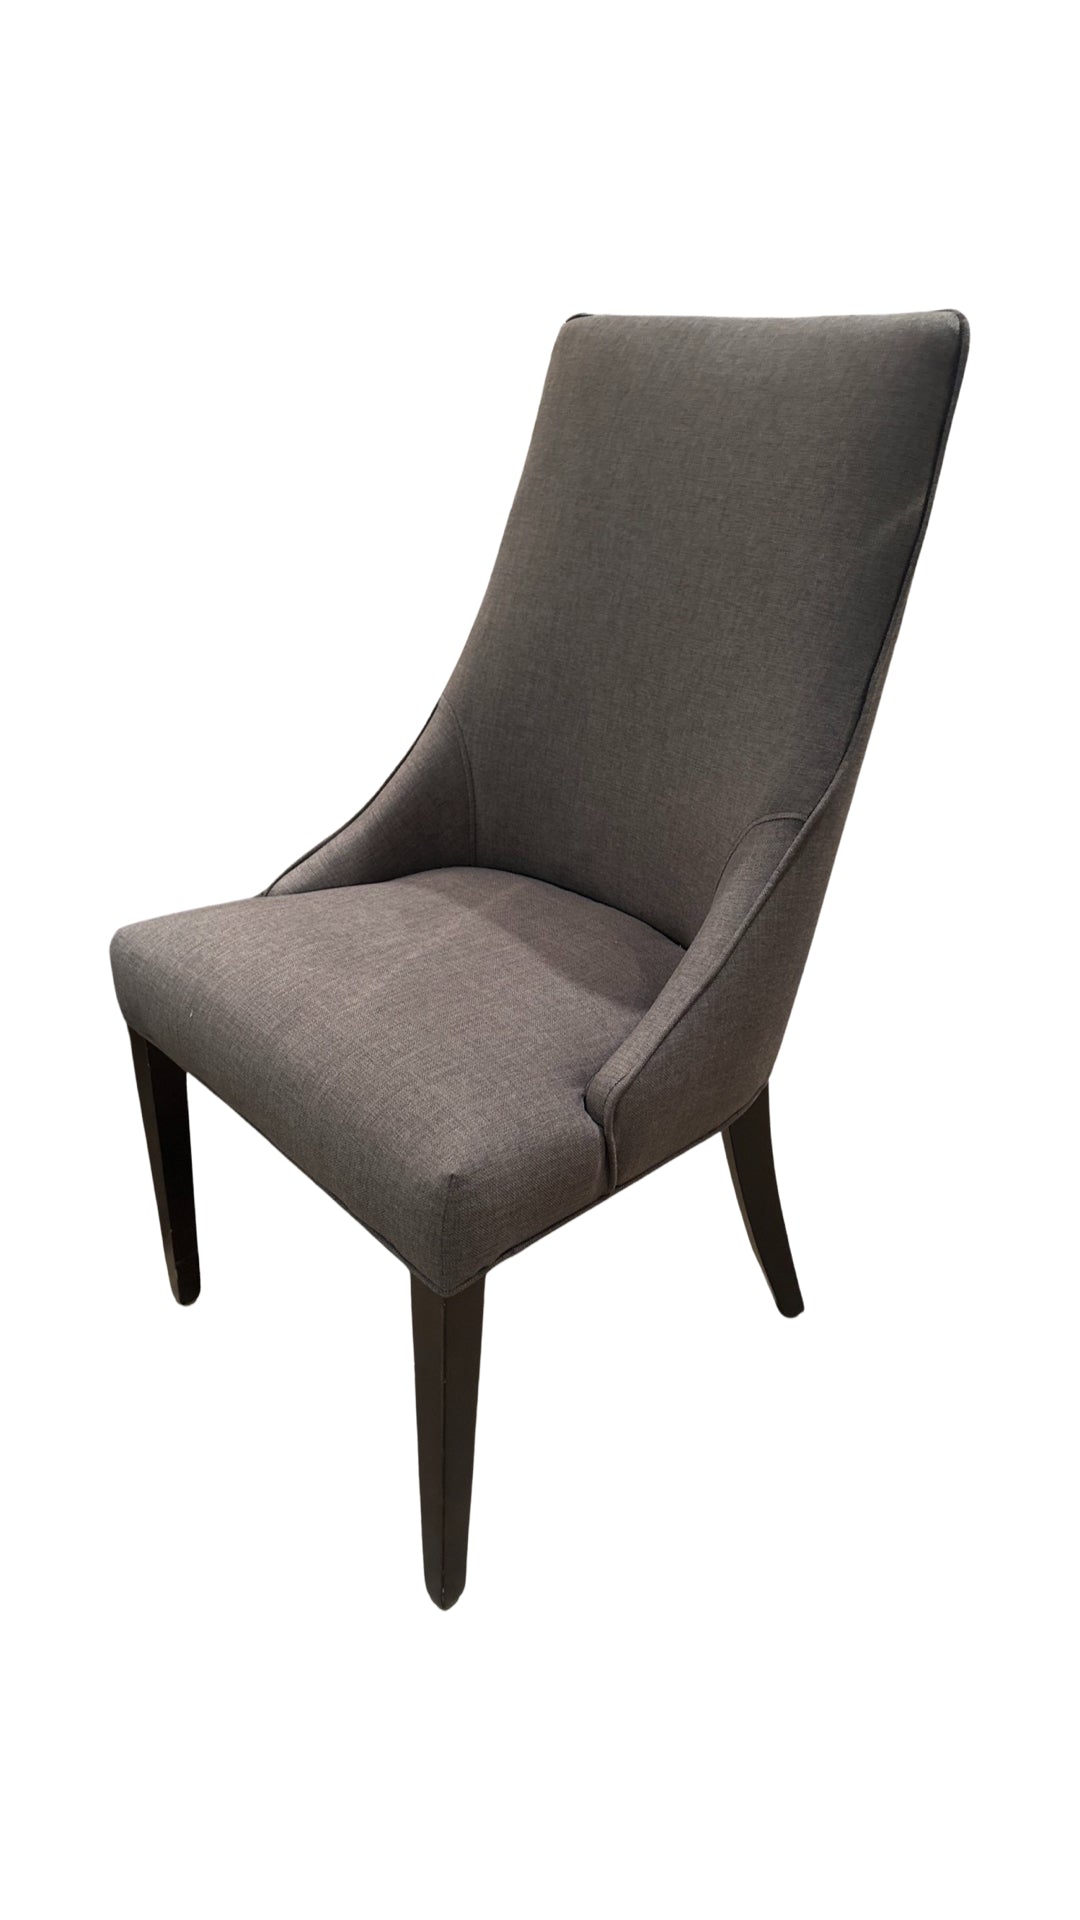 HLHF Y1087 Dining Chair Dining Furniture Store Burlington Ontario Near Me 